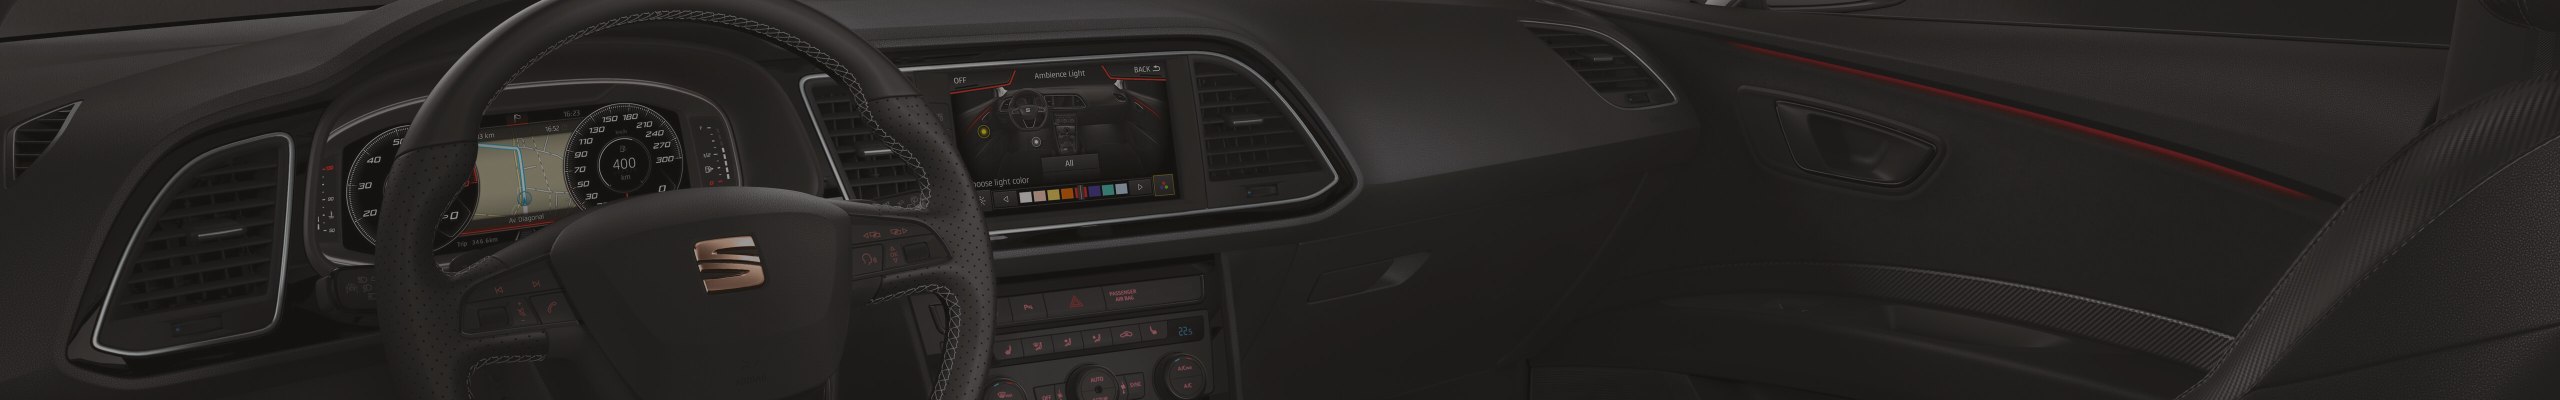 SEAT Connected cars technology – Digital cockpit